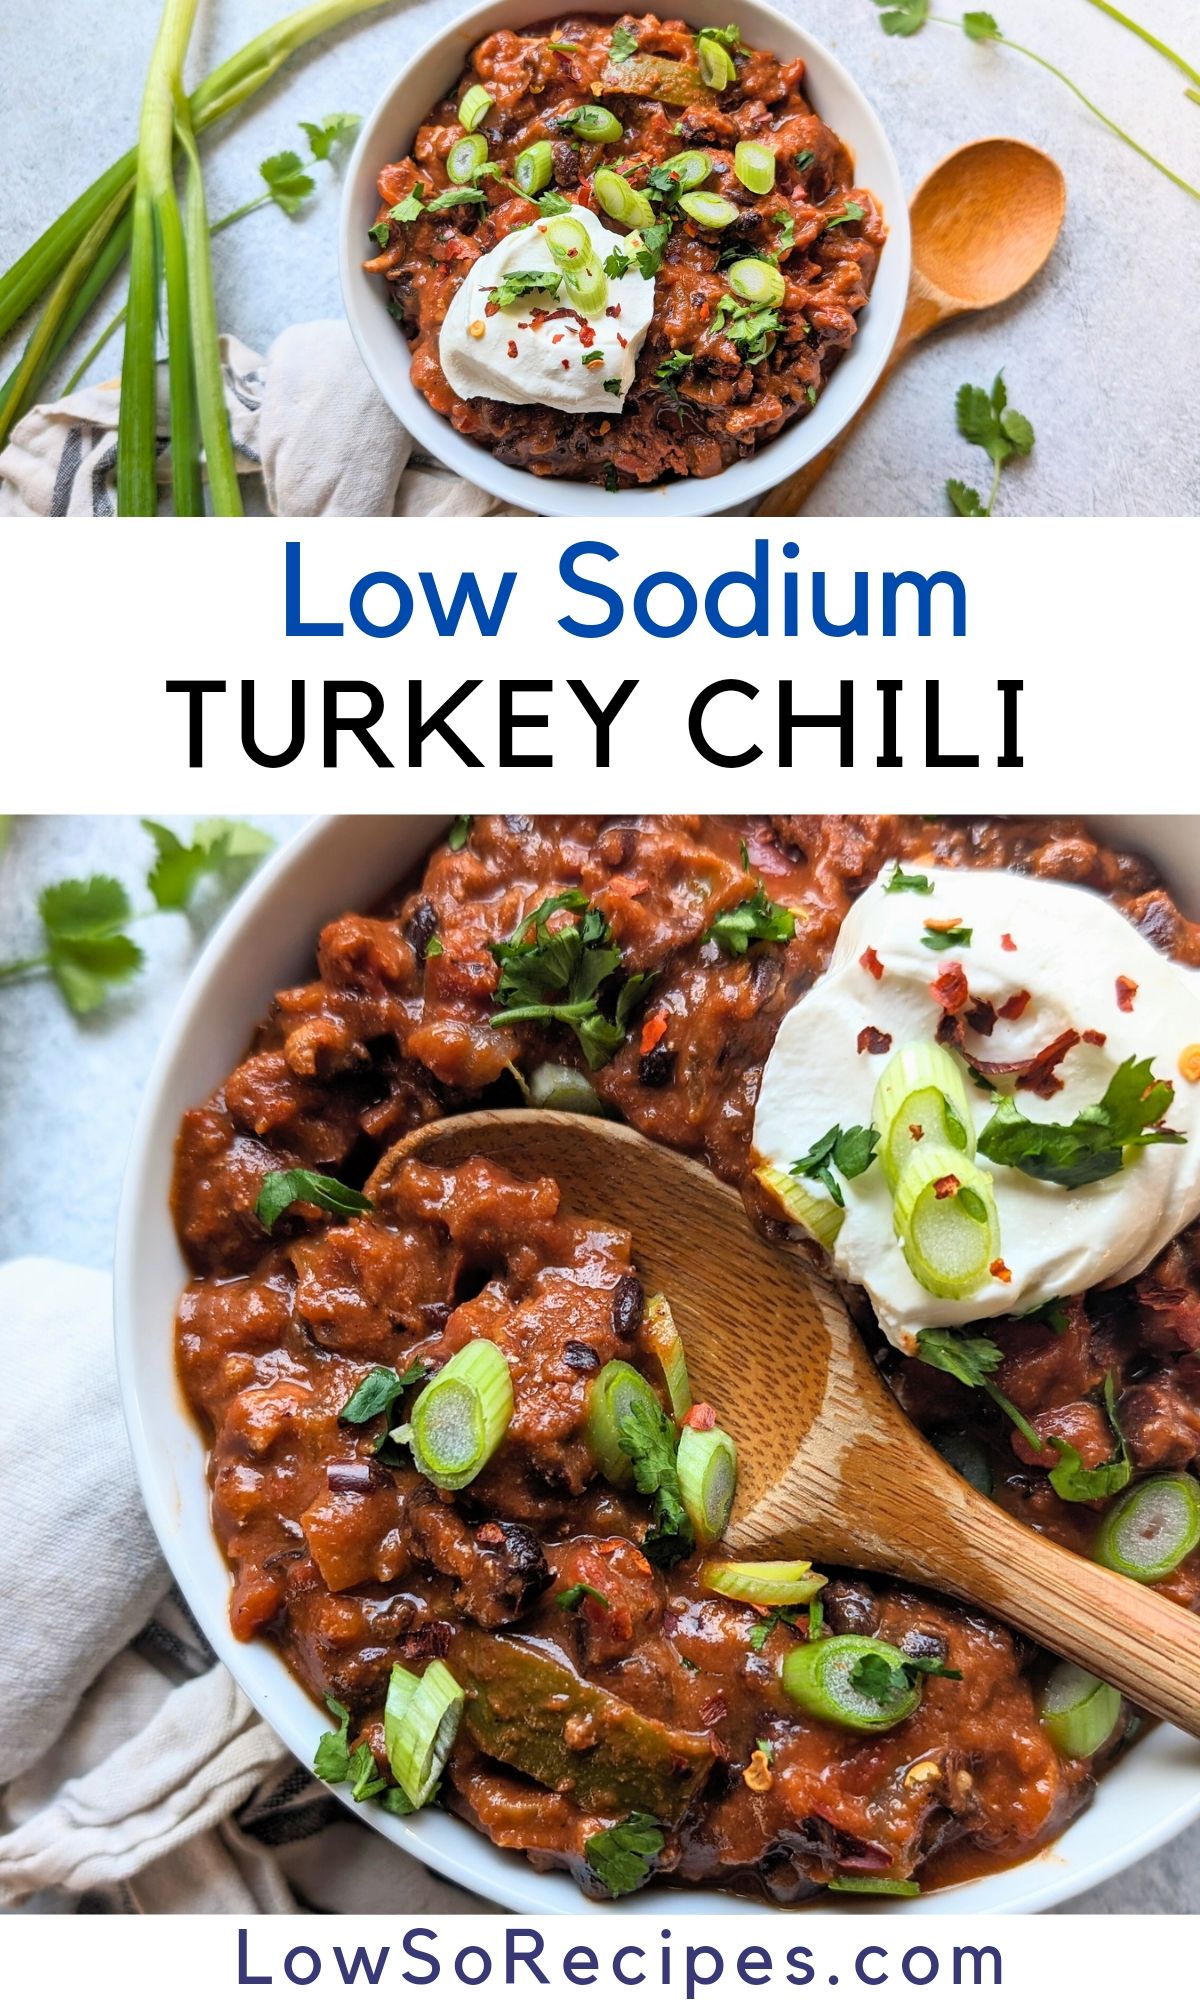 low sodium turkey chili recipe easy low sodium chili with turkey meat and onions and bell peppers and spices with no salt